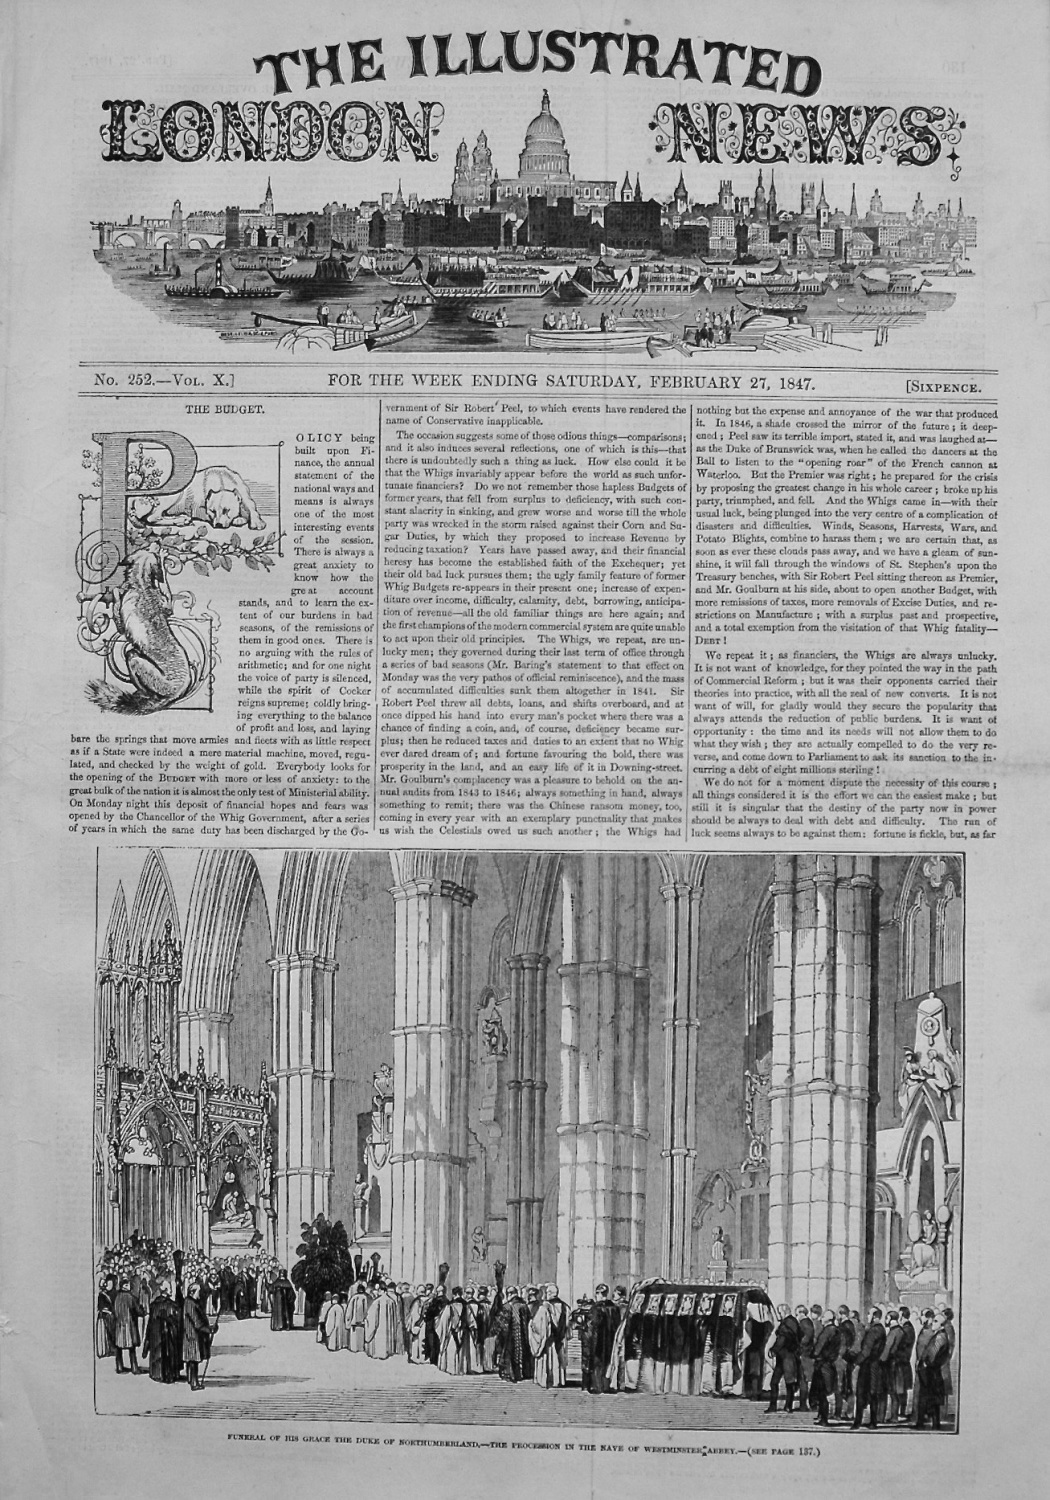 Illustrated London News. February 27th, 1847.